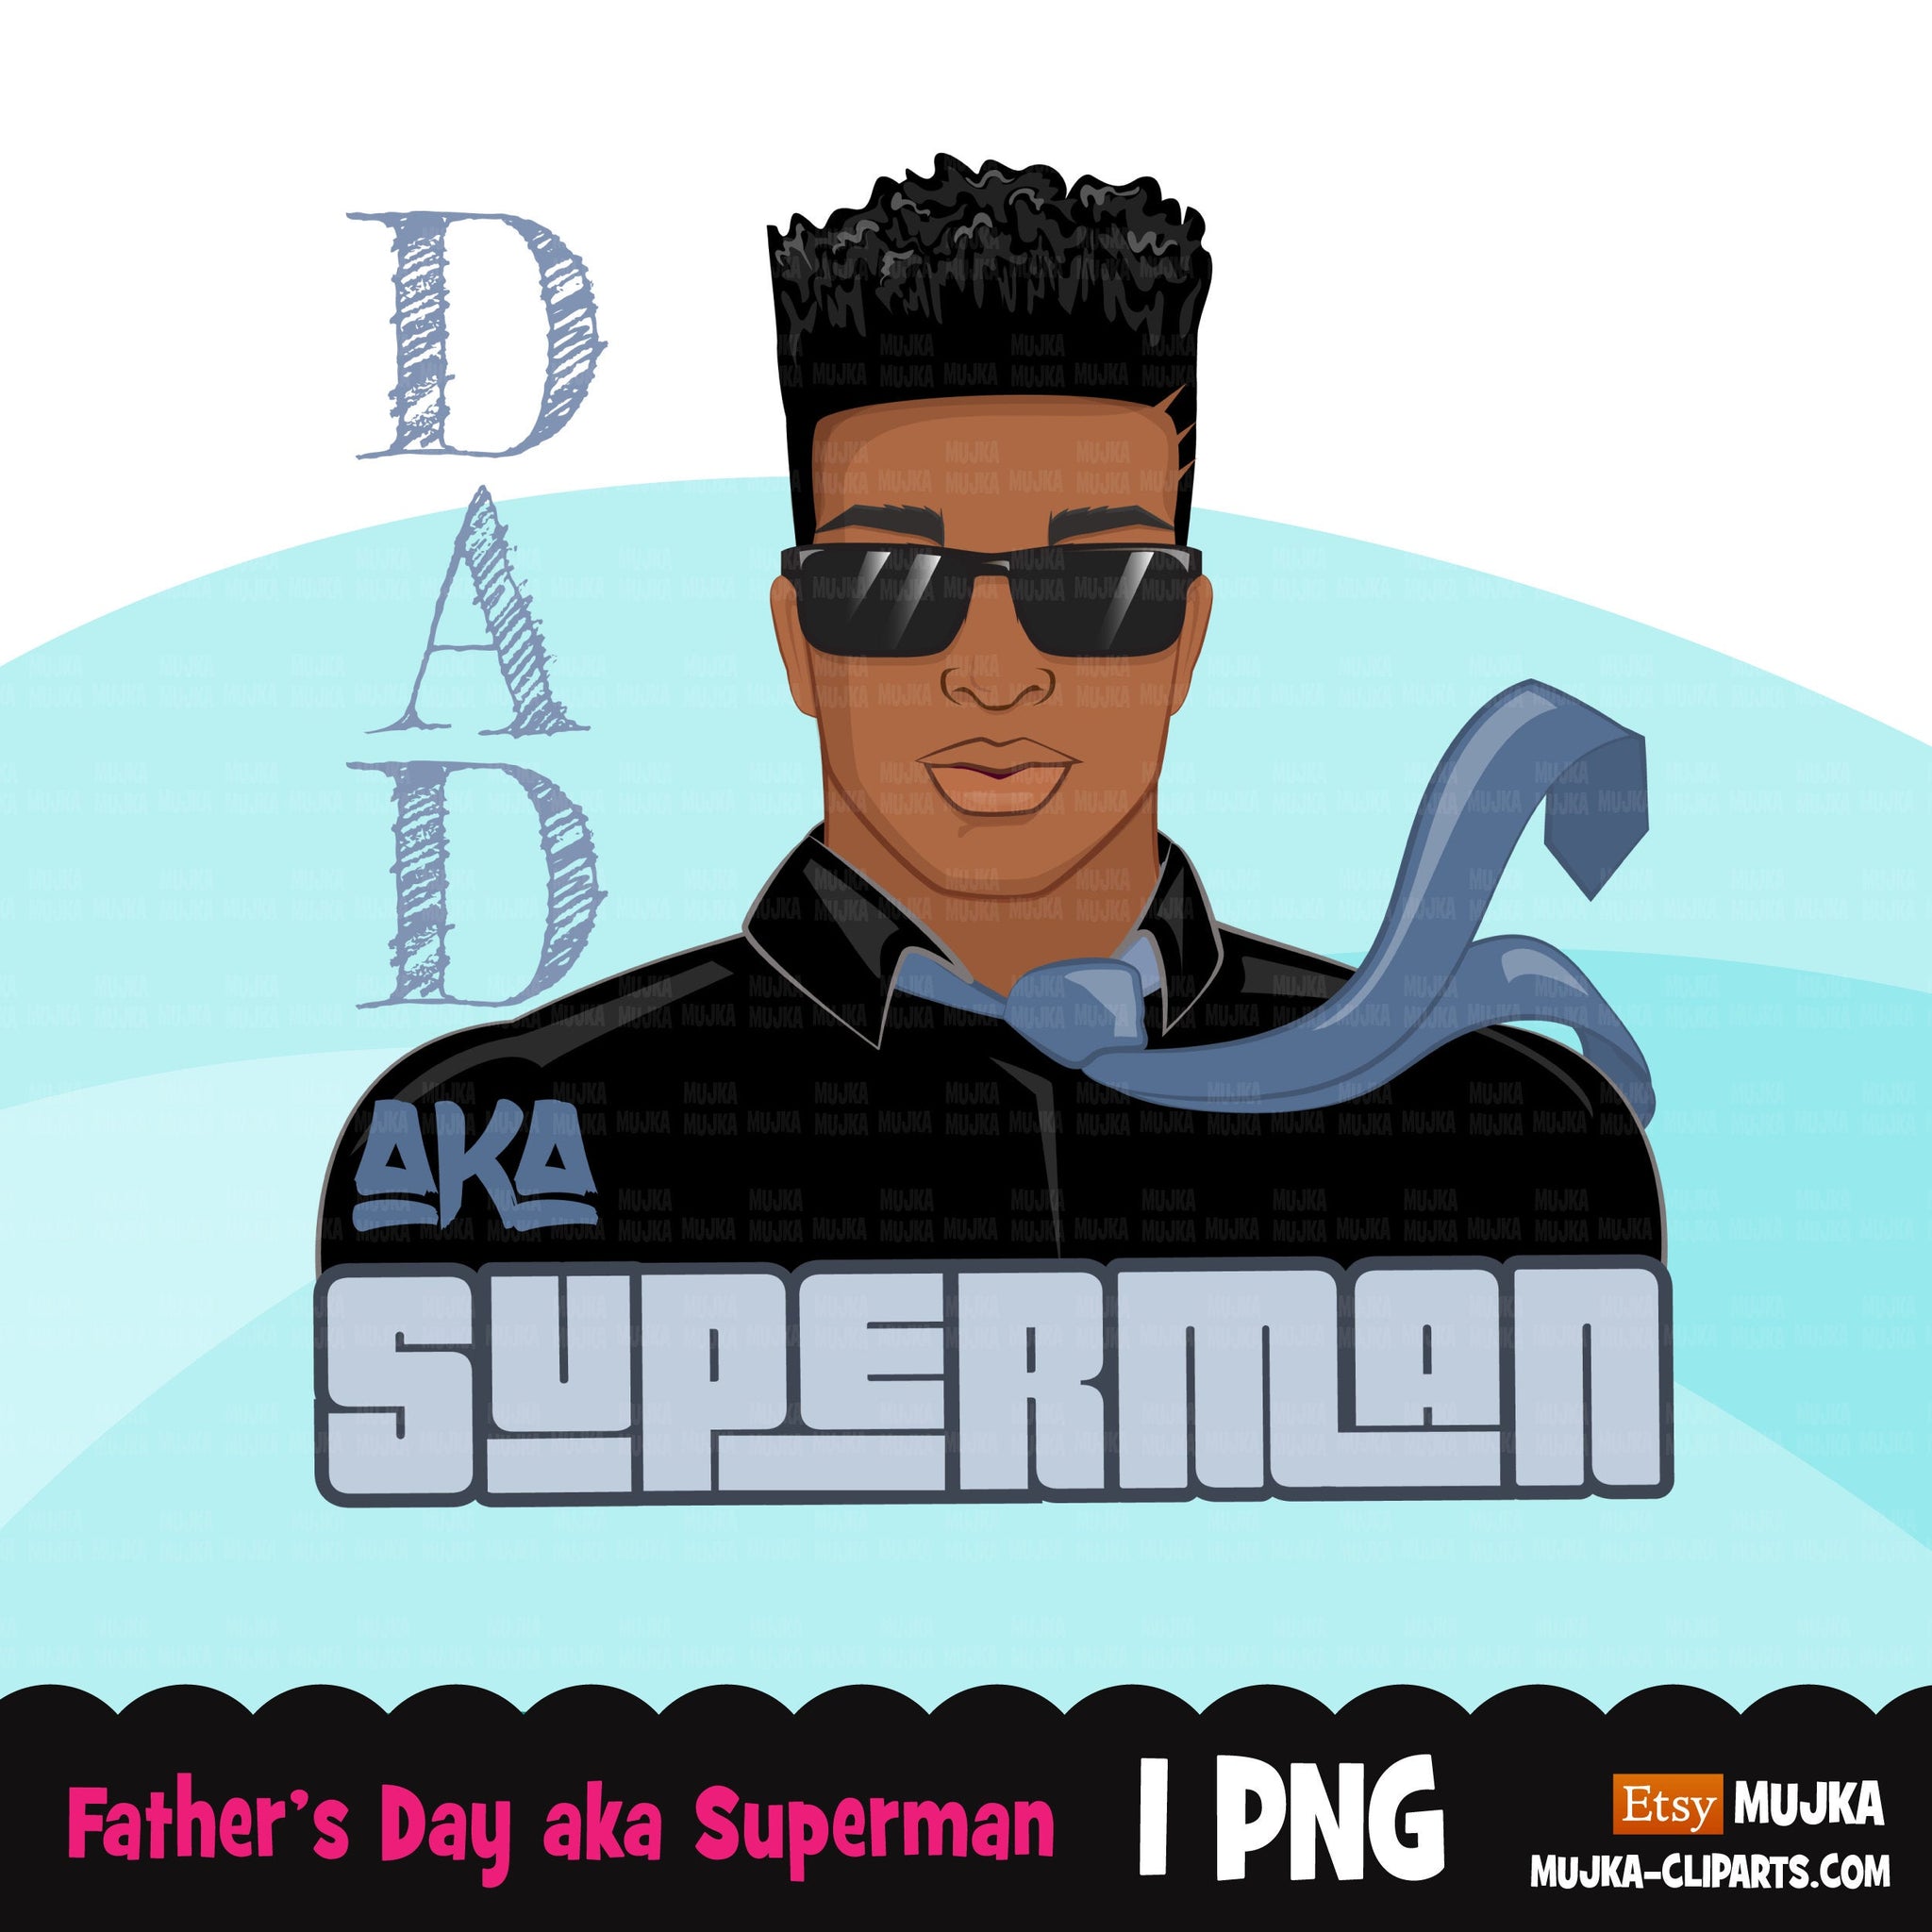 Father's Day clipart, fathers day sublimation designs, black man with goatee, dad shirt, Dad aka superman, shirt graphics png